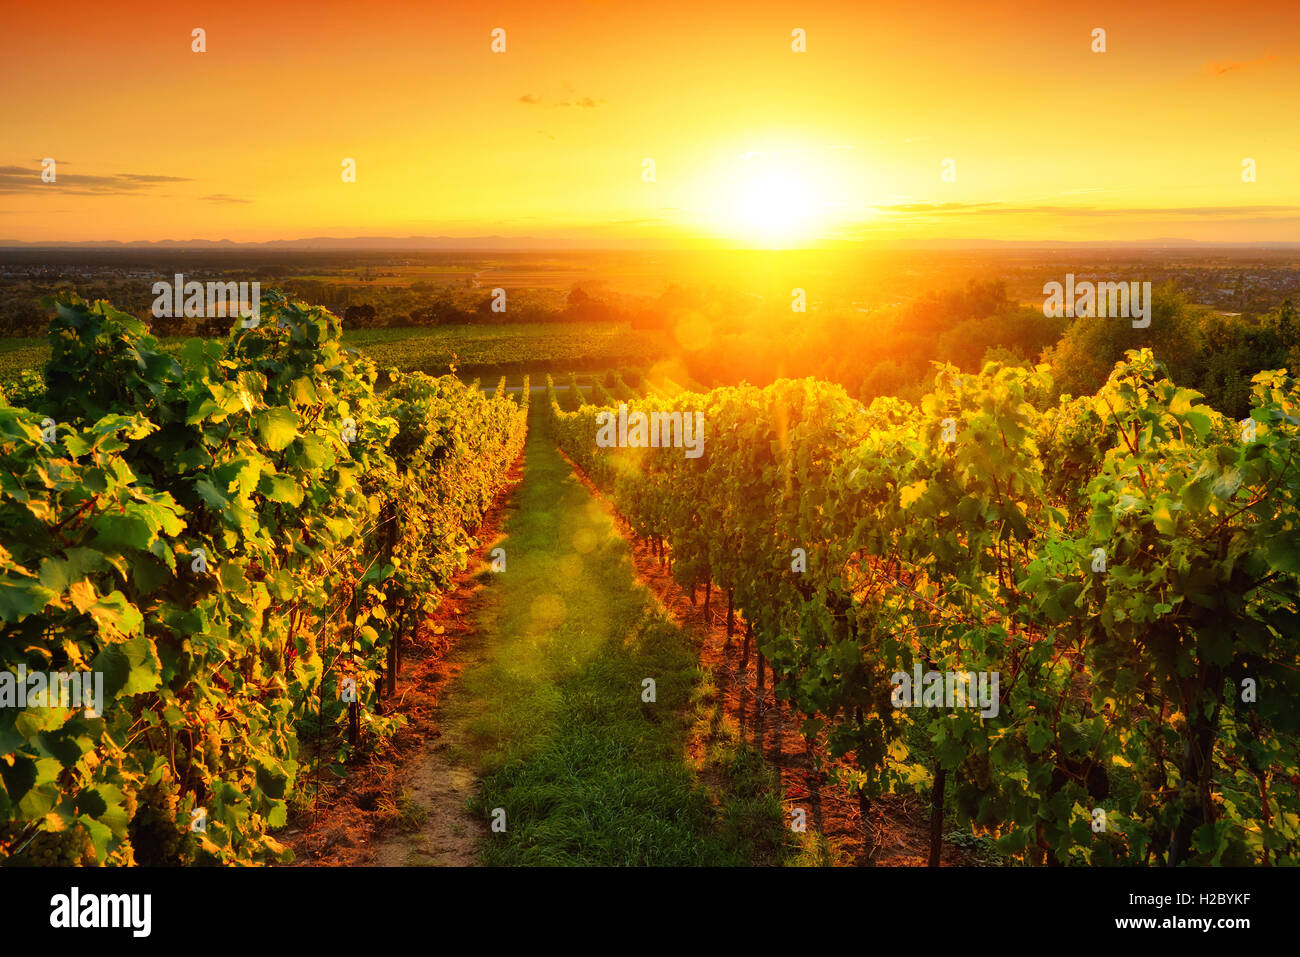 Landscape with a warmly illuminated vineyard on a hill and the warm sunset sky Stock Photo